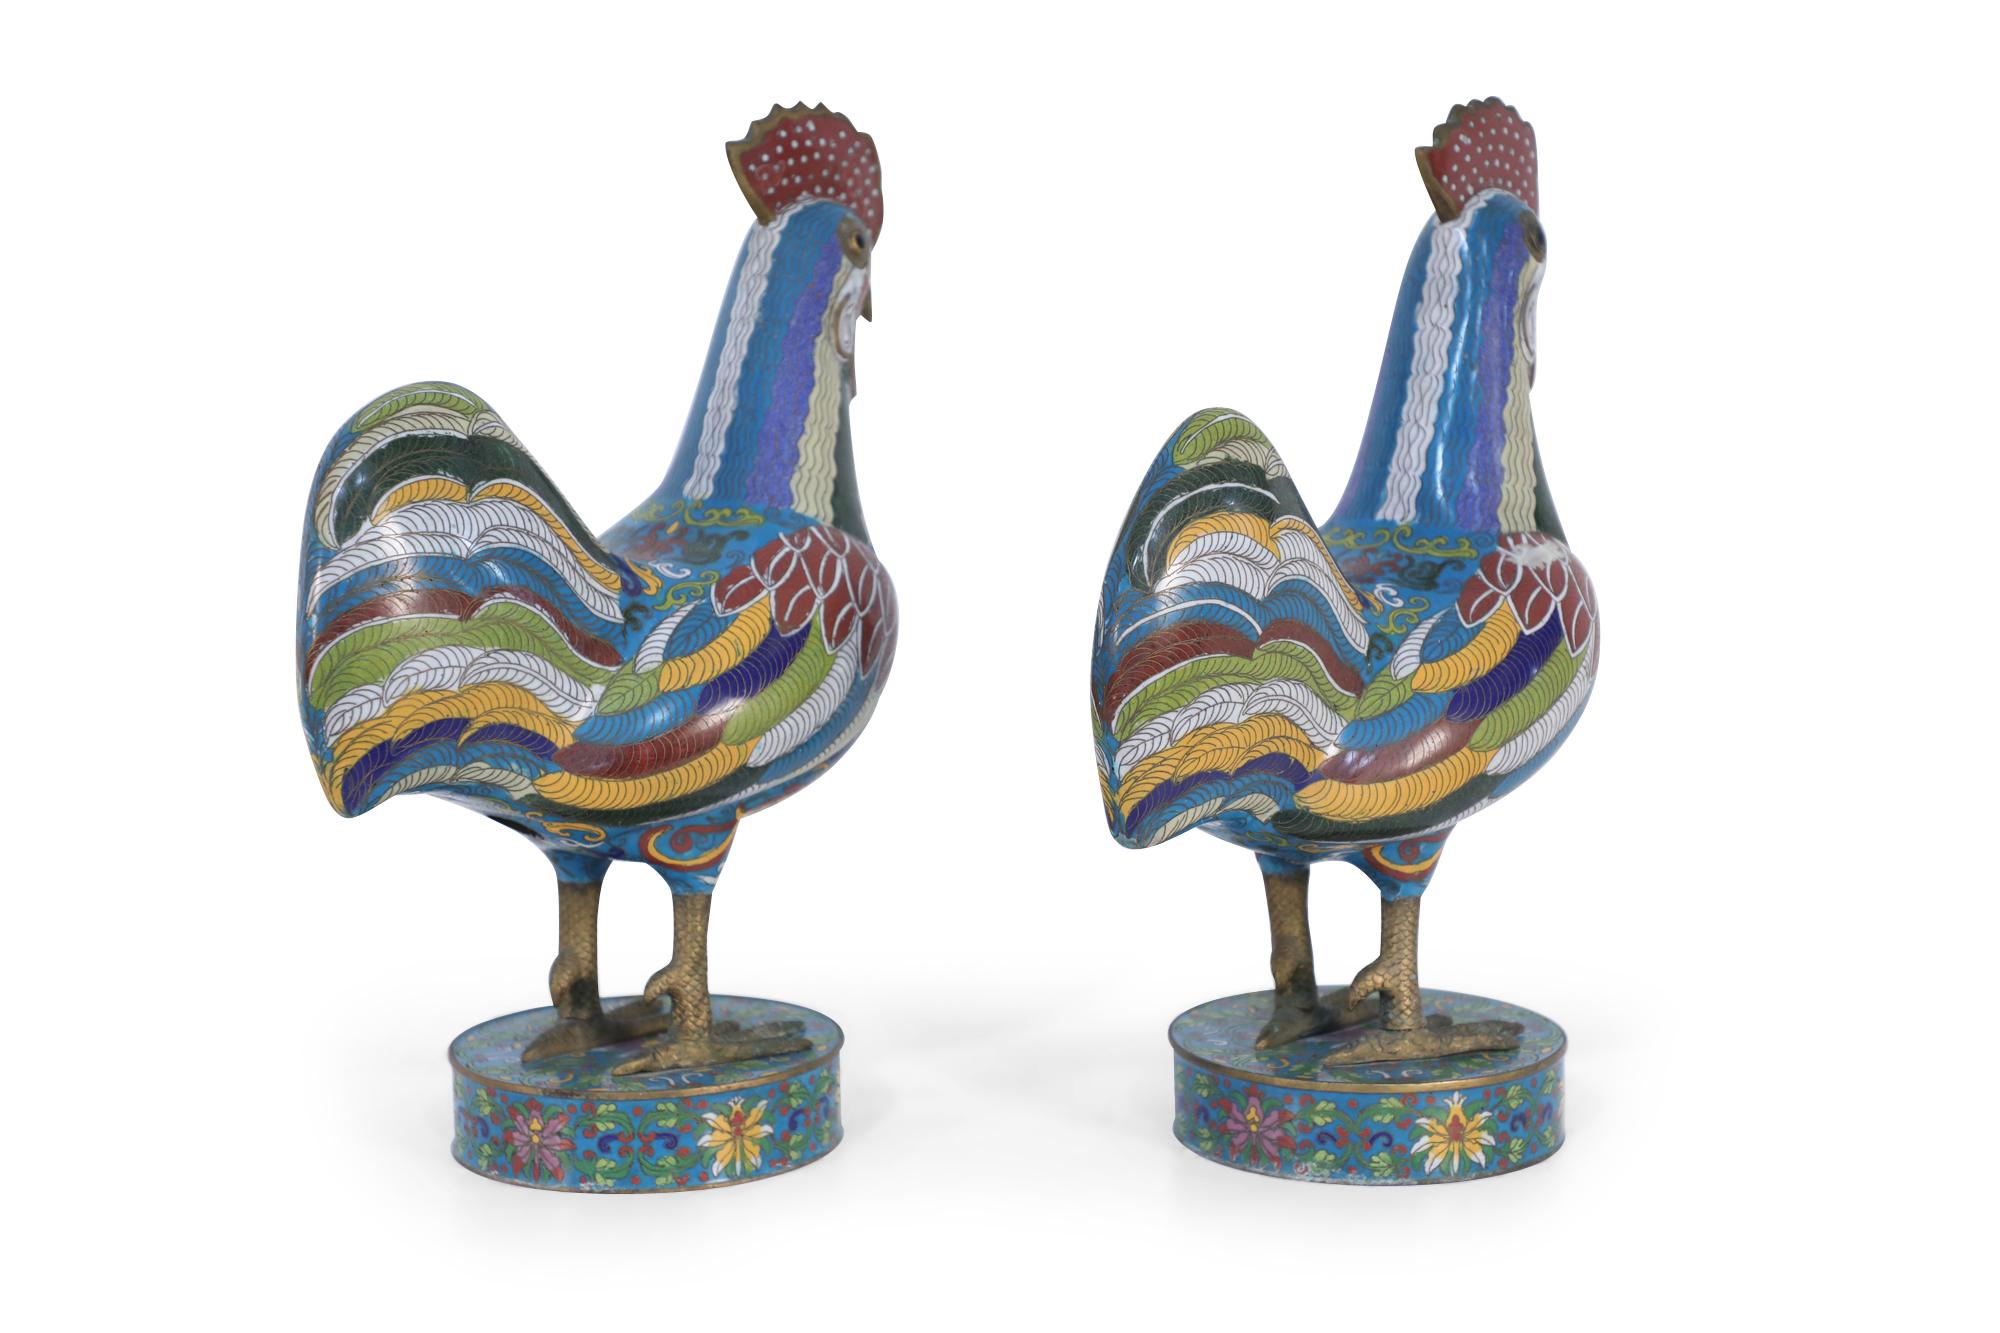 Pair of Early 20th Century Chinese Multi-Colored Cloisonne Rooster Sculptures For Sale 2